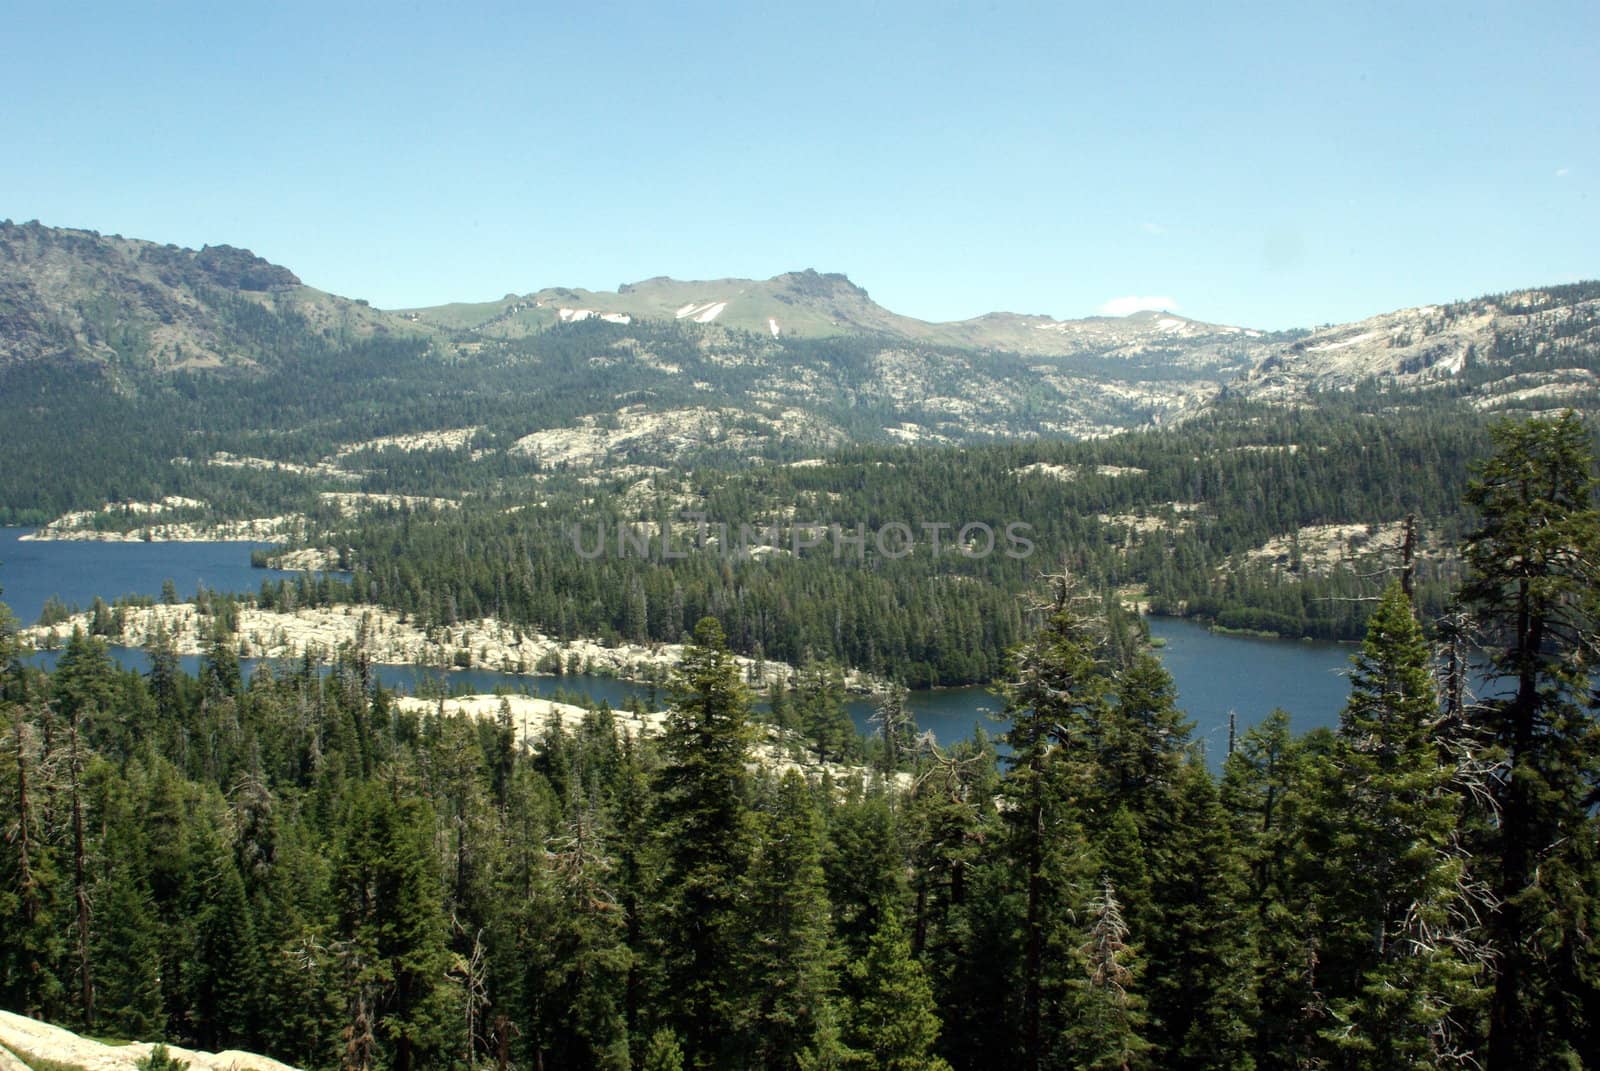 View of Silver Lake in late spring located in the high sierras of California